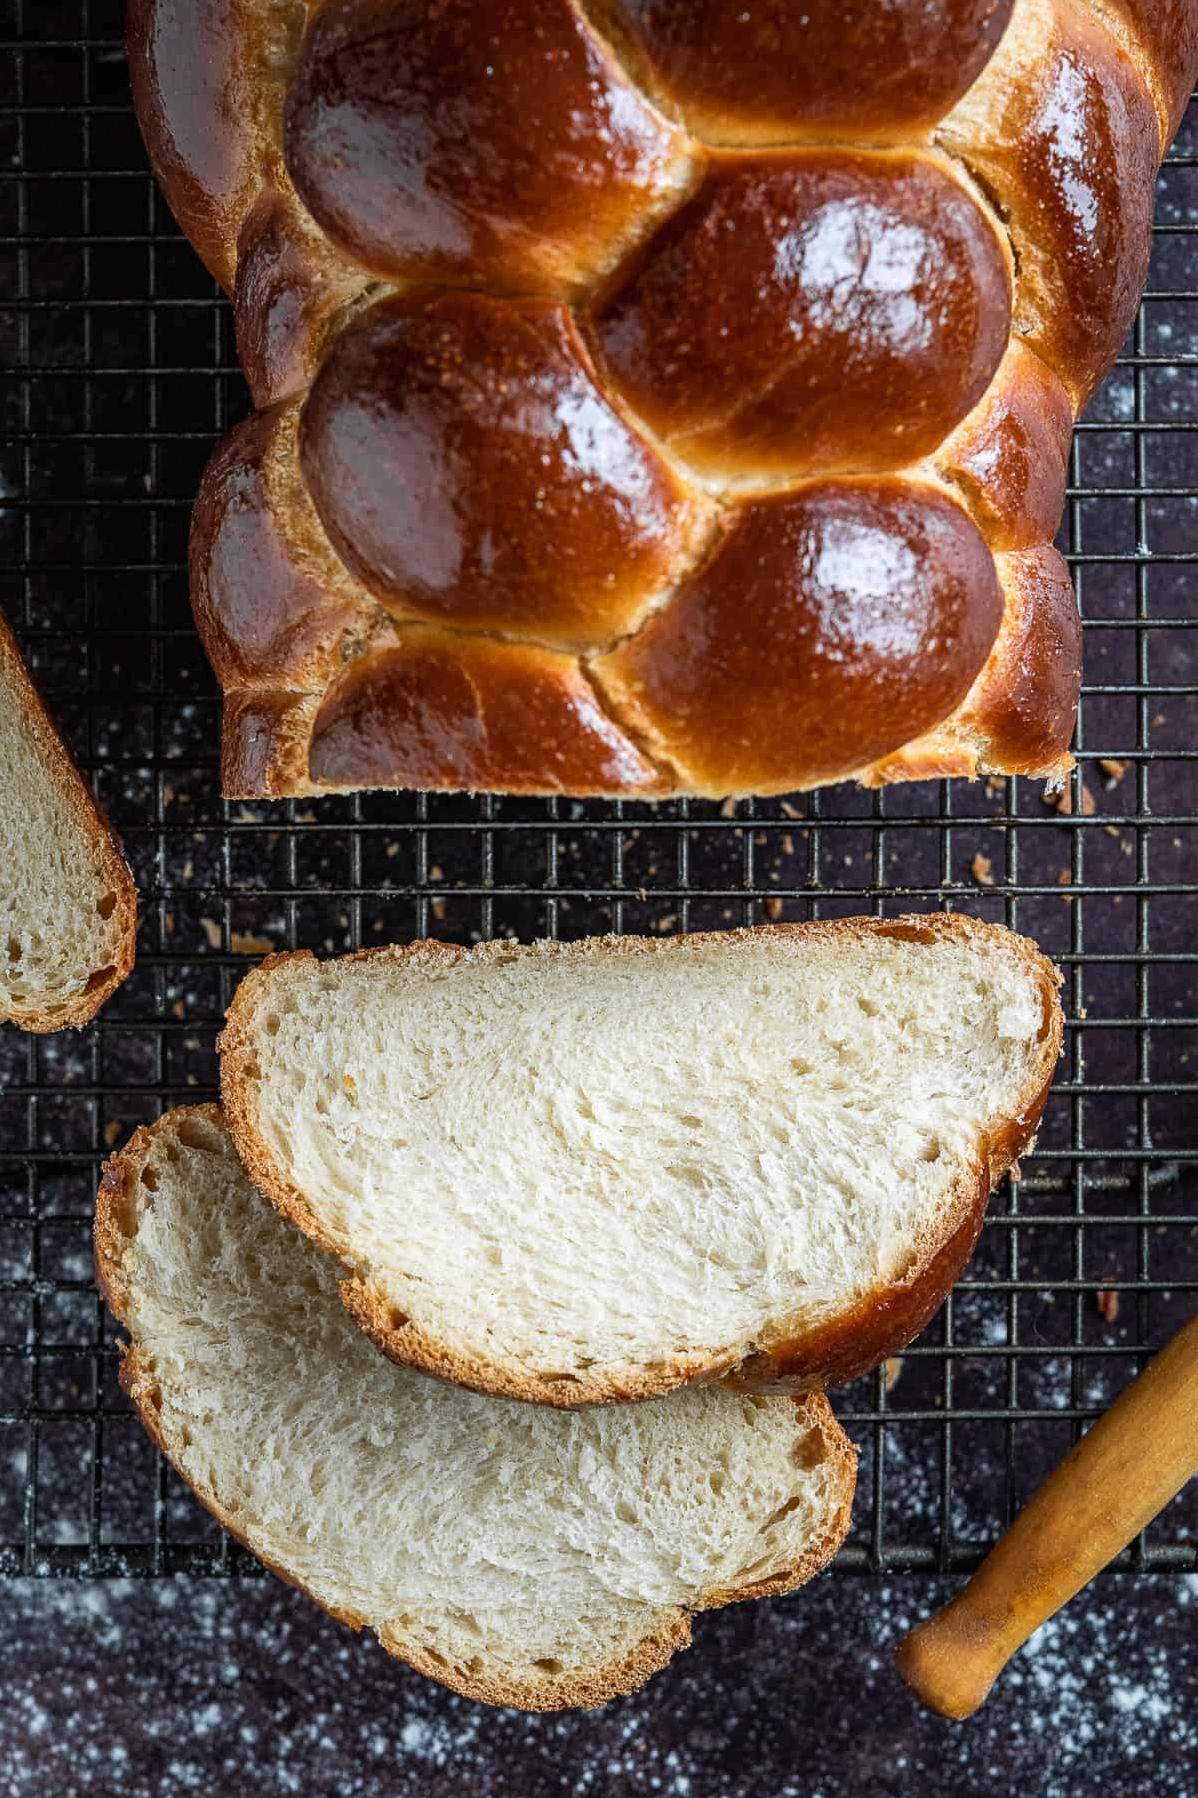  This vegan challah is sure to be a crowd-pleaser